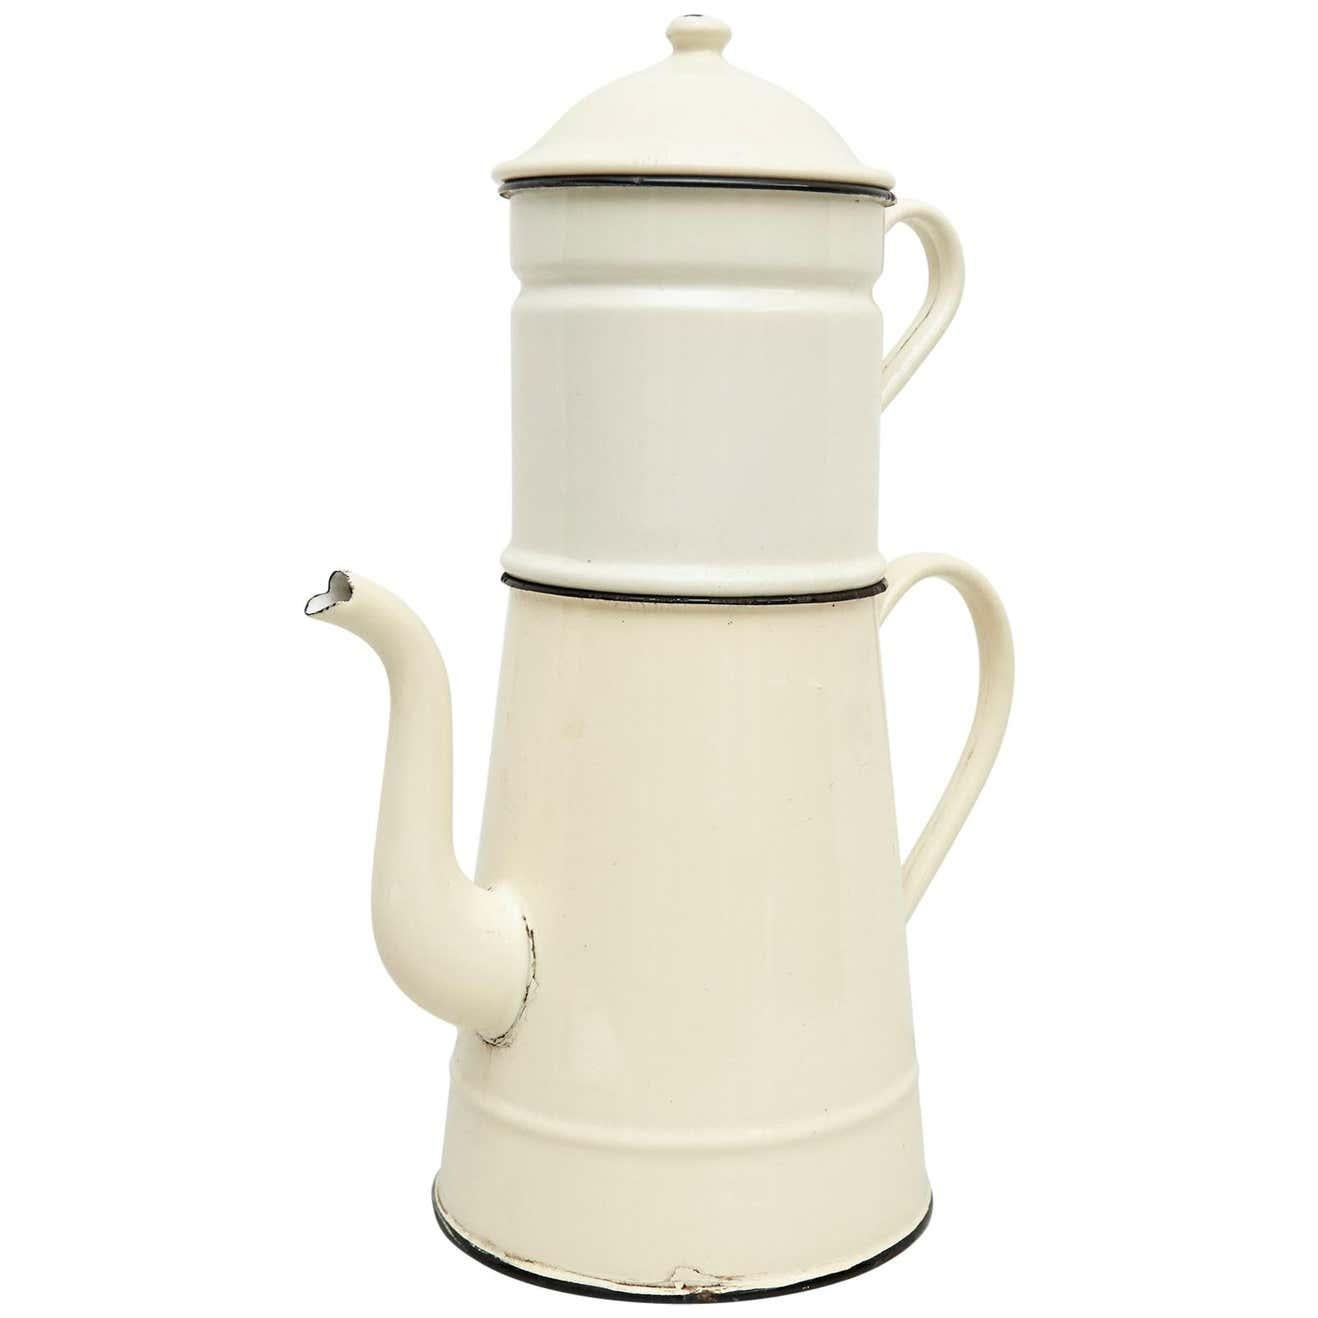 Vintage French Enamelwared Sculptural Decorative Coffee Maker, circa 1920 For Sale 4